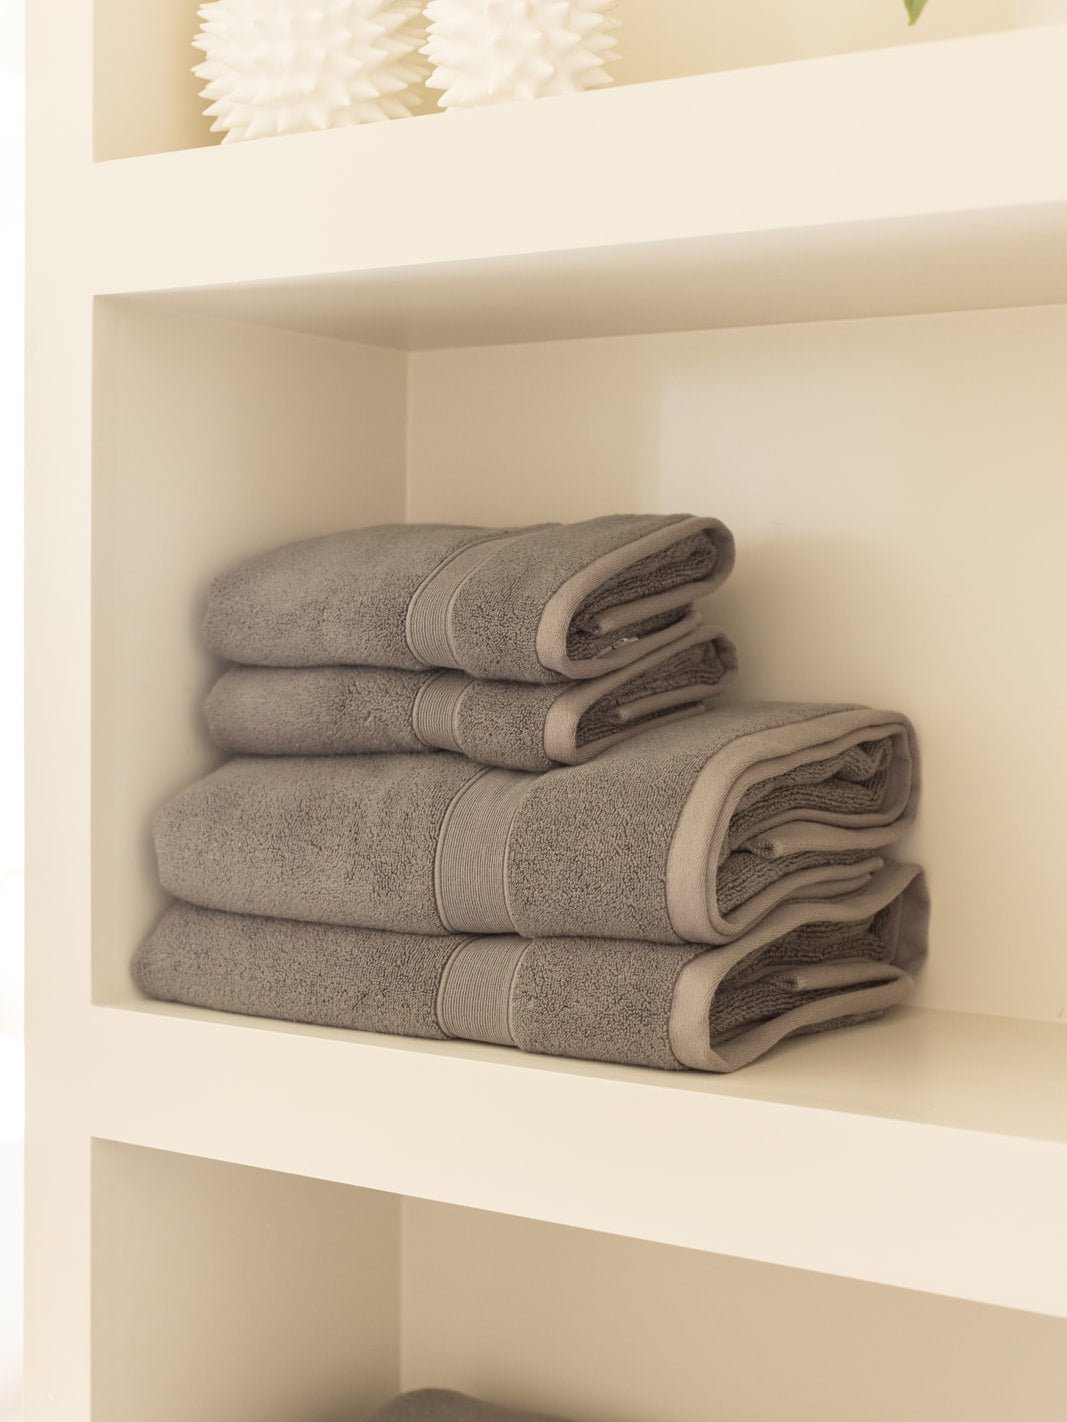 Charcoal luxe bath towels and hand towels folded on shelf |Color:Charcoal